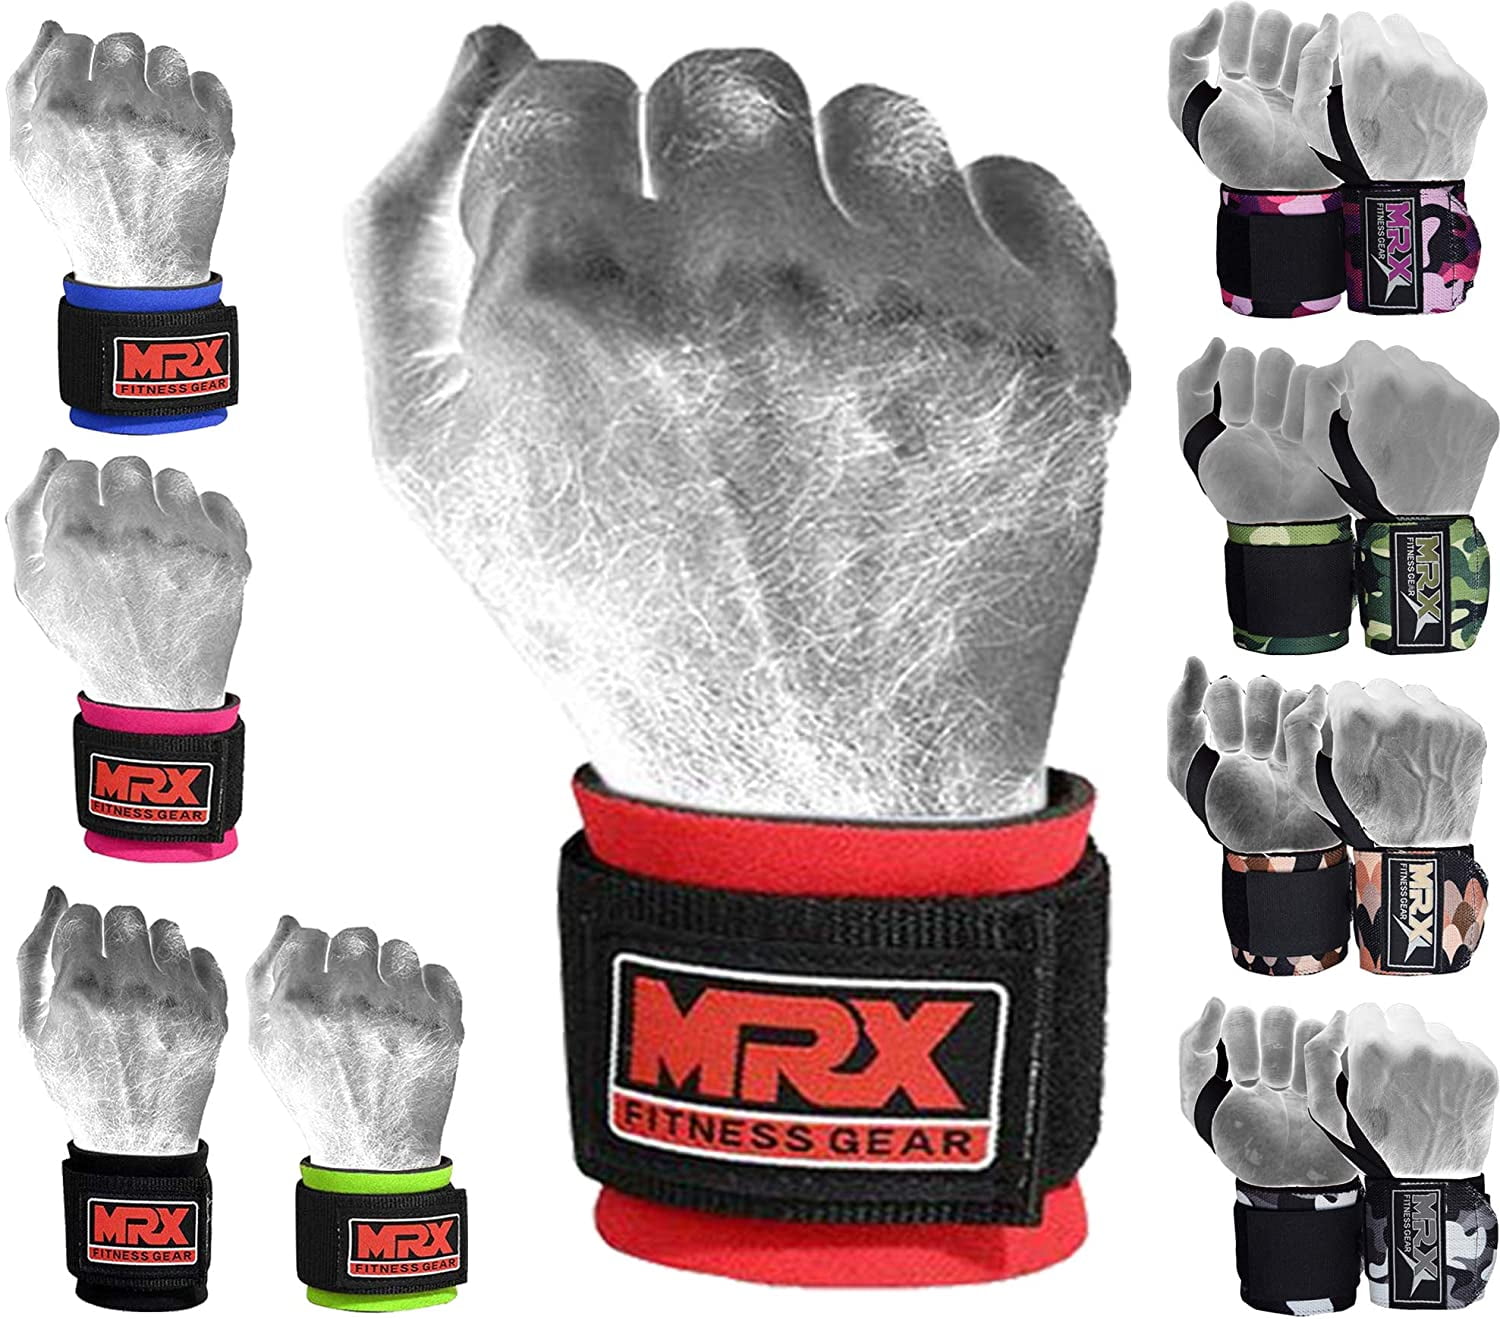 Weight Lifting Wrist Support Training Gym Straps Grip Body building Wrap Maxx gr 